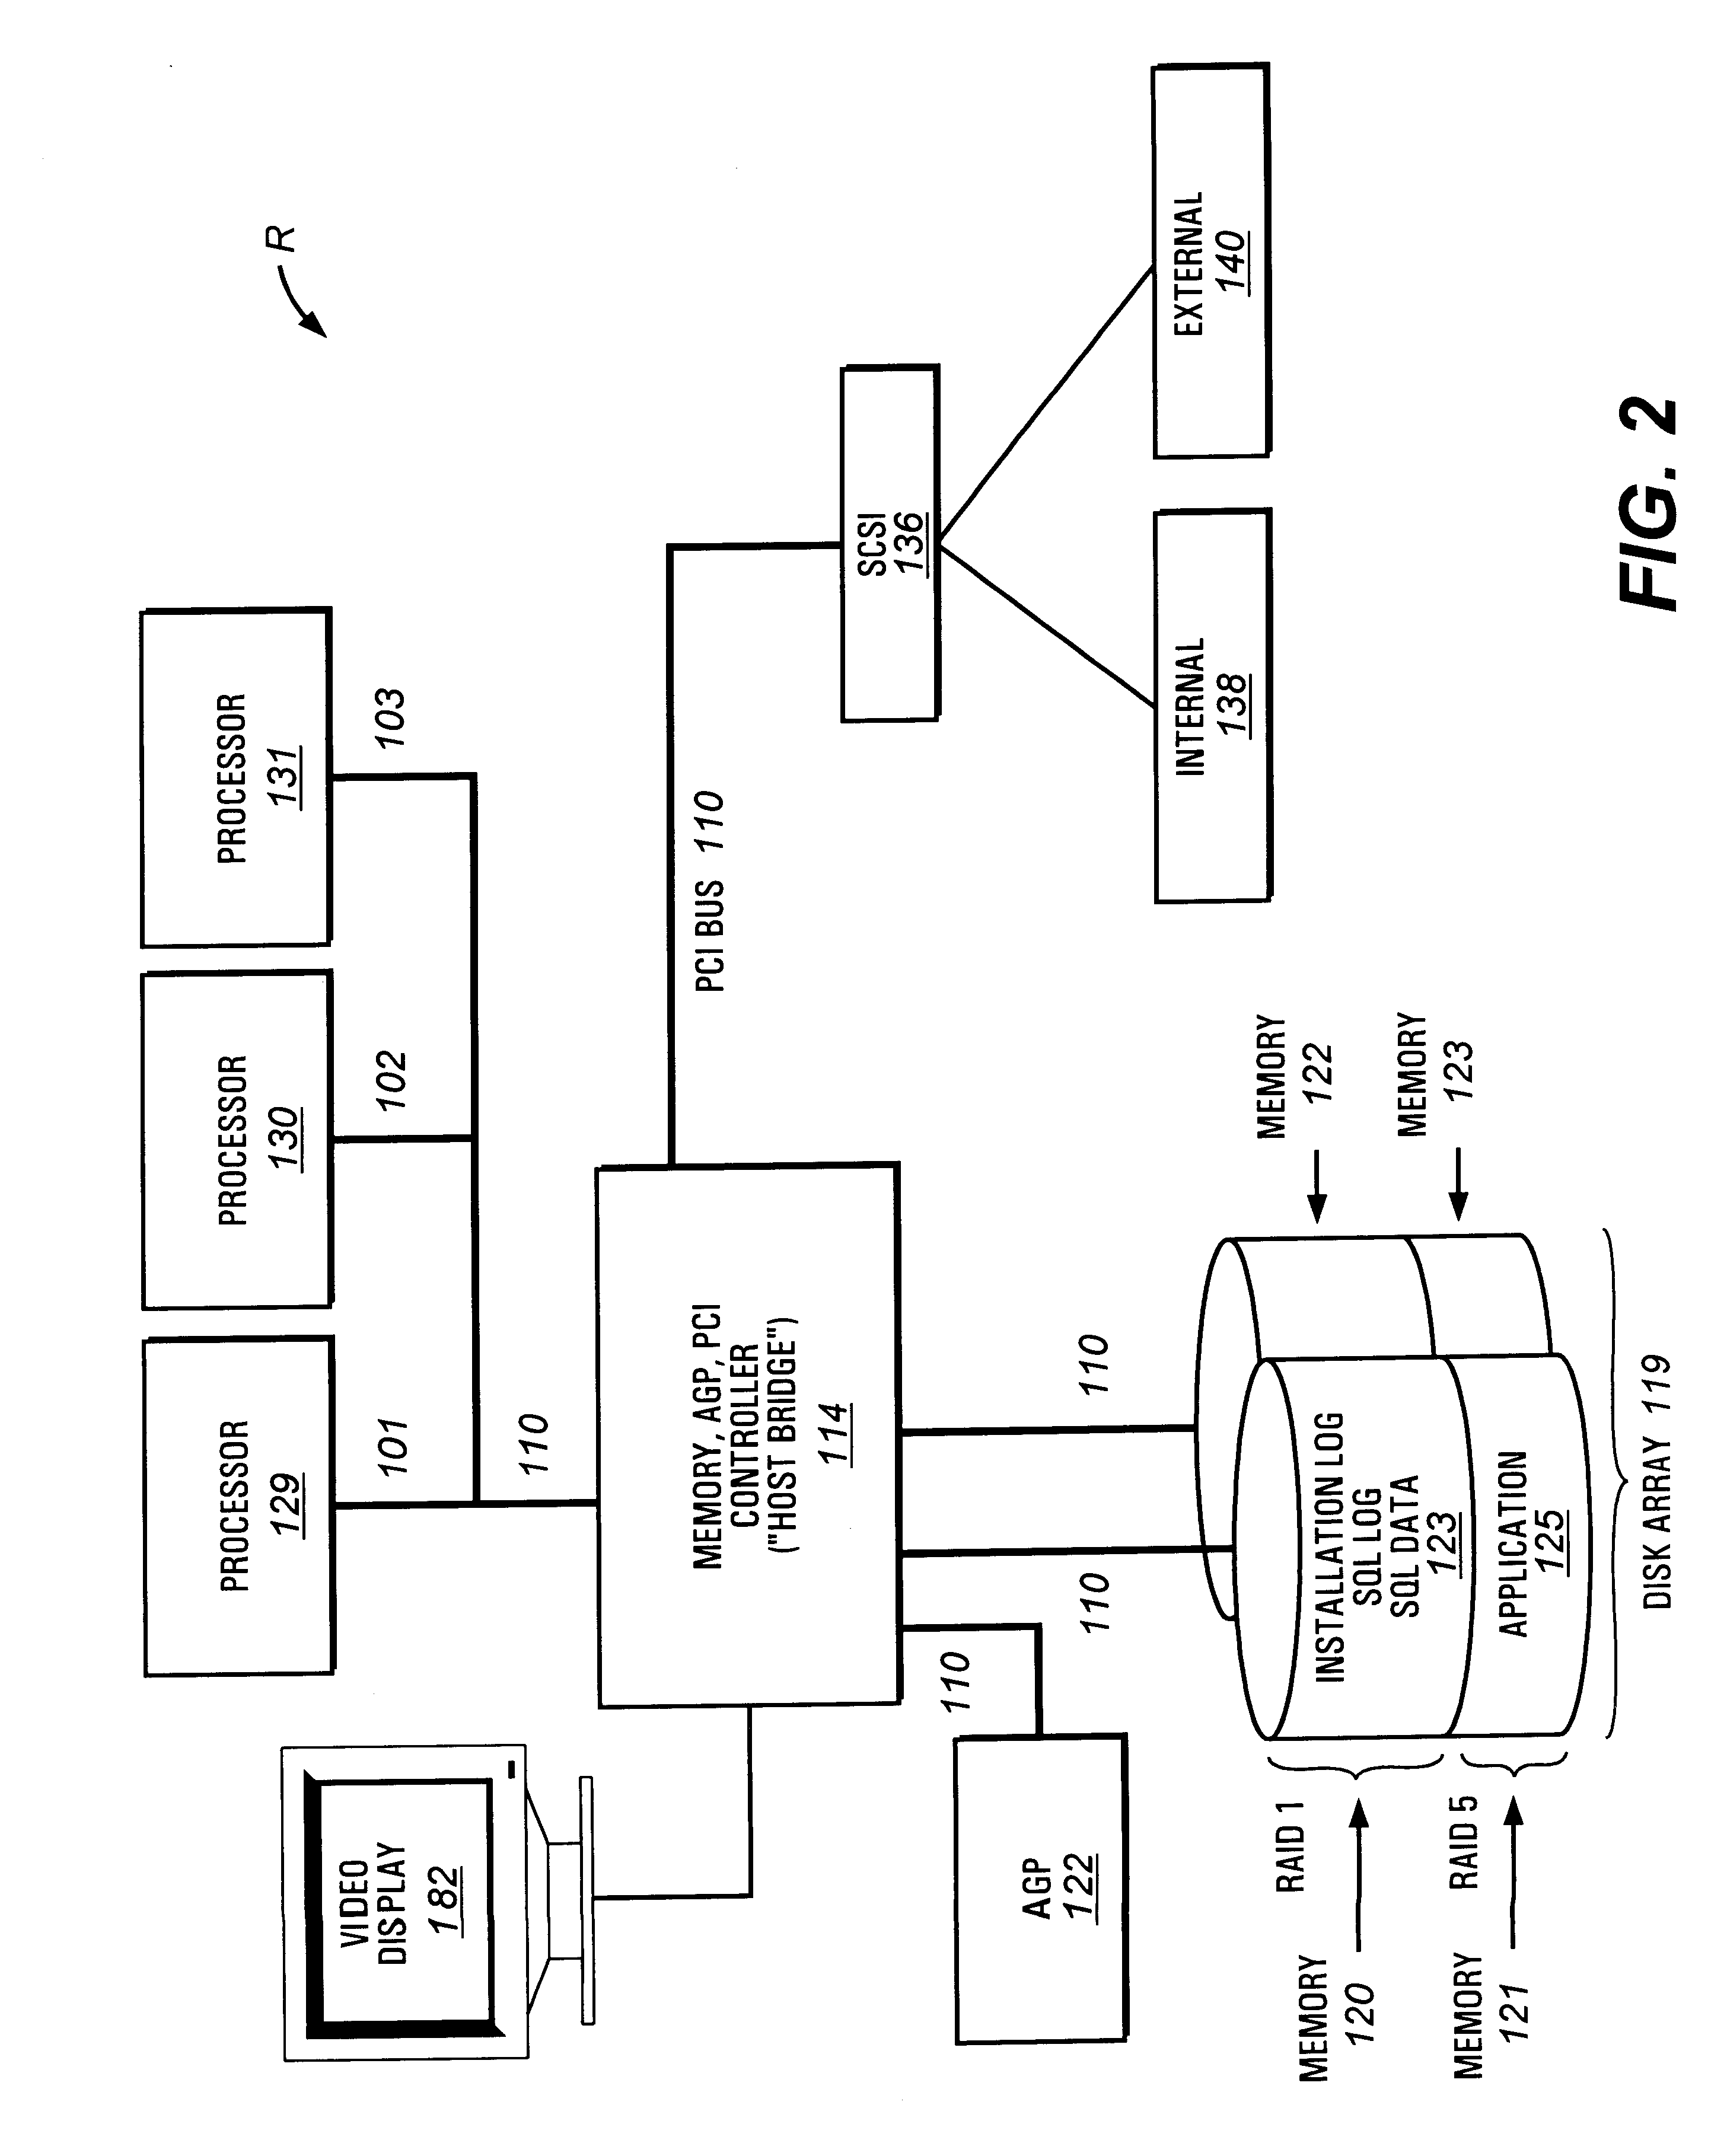 Configuration sizer for selecting system of computer components based on price/performance normalization